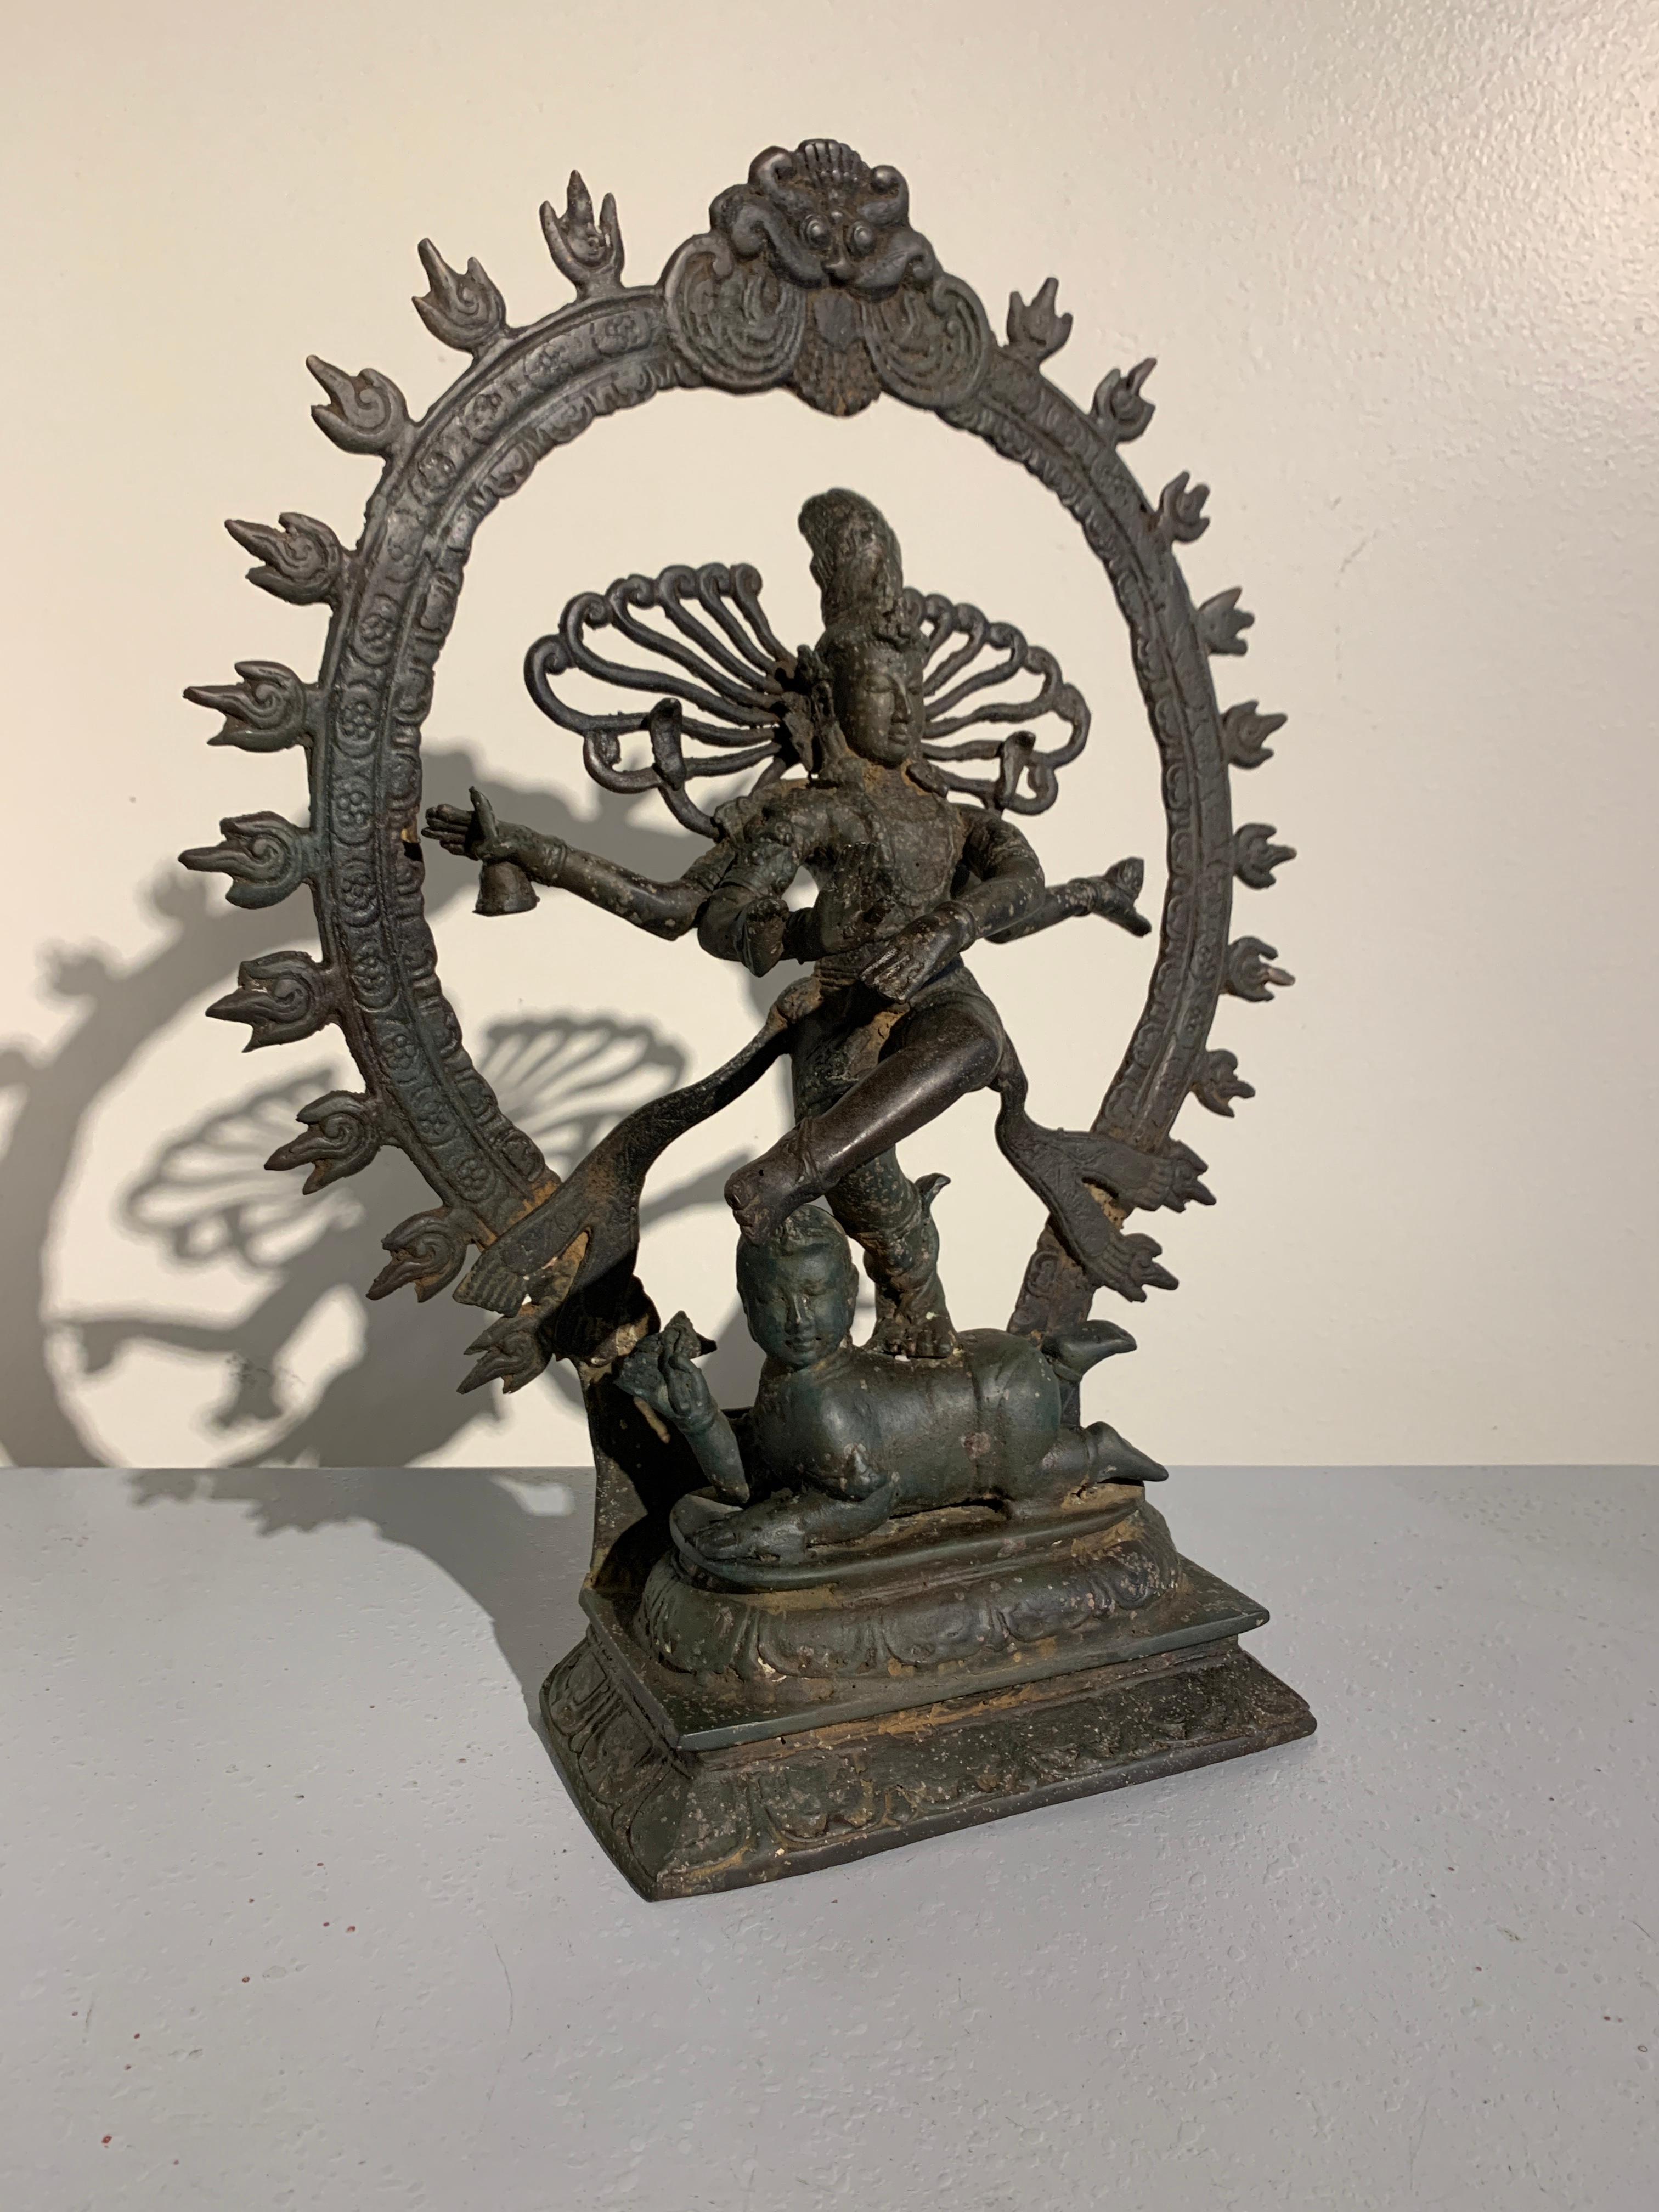 A wonderfully animated Indonesian cast and patinated metal statue of Shiva Nataraja, Shiva as Lord of the Dace, Bali, 1970s.

The sculpture depicts one of the most famous images in Hindu mythology, that of Shiva dancing his cosmic dance, known as